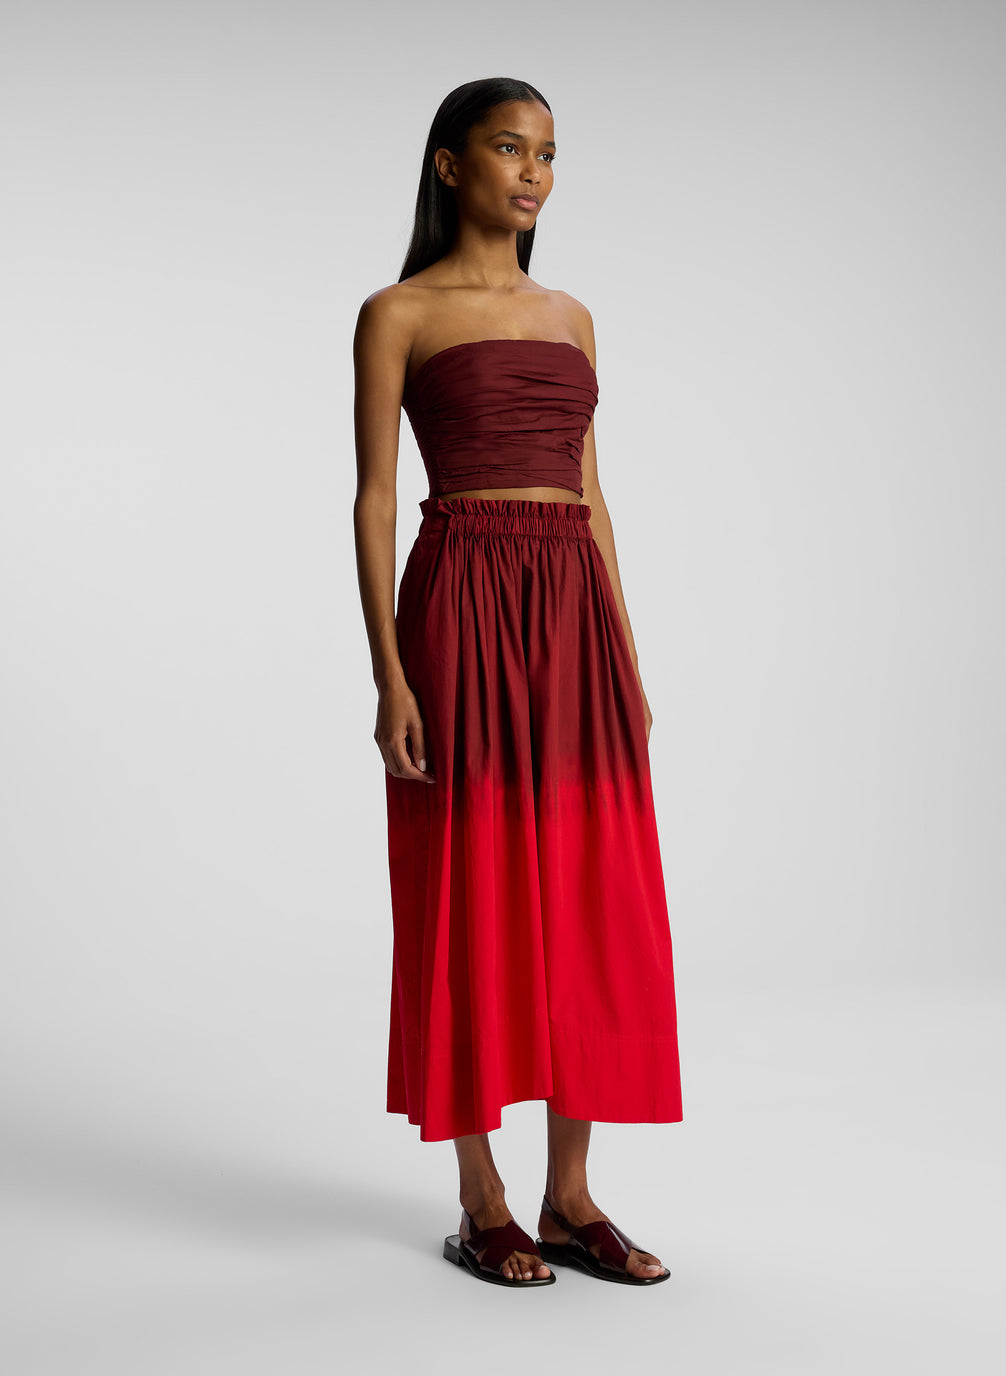 side view of woman wearing burgundy and red ombre top and skirt